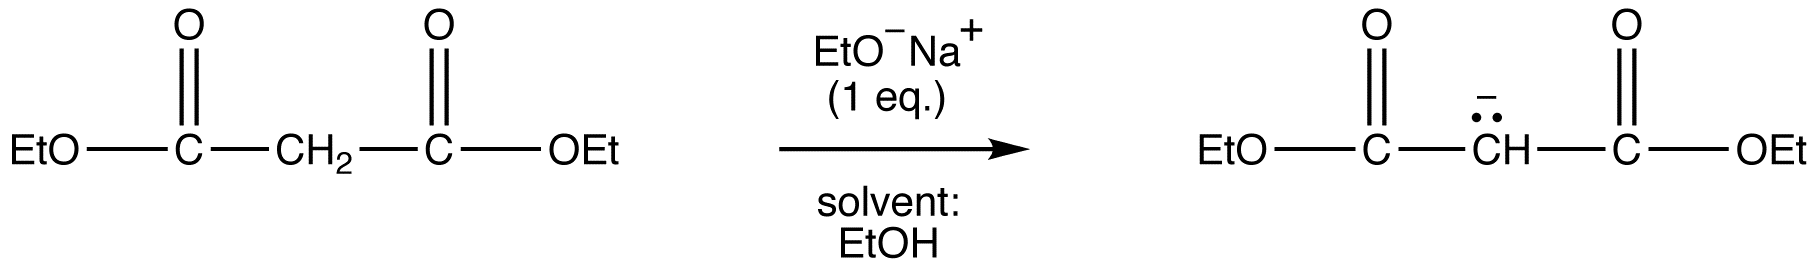 malonicestersynthesis4.png